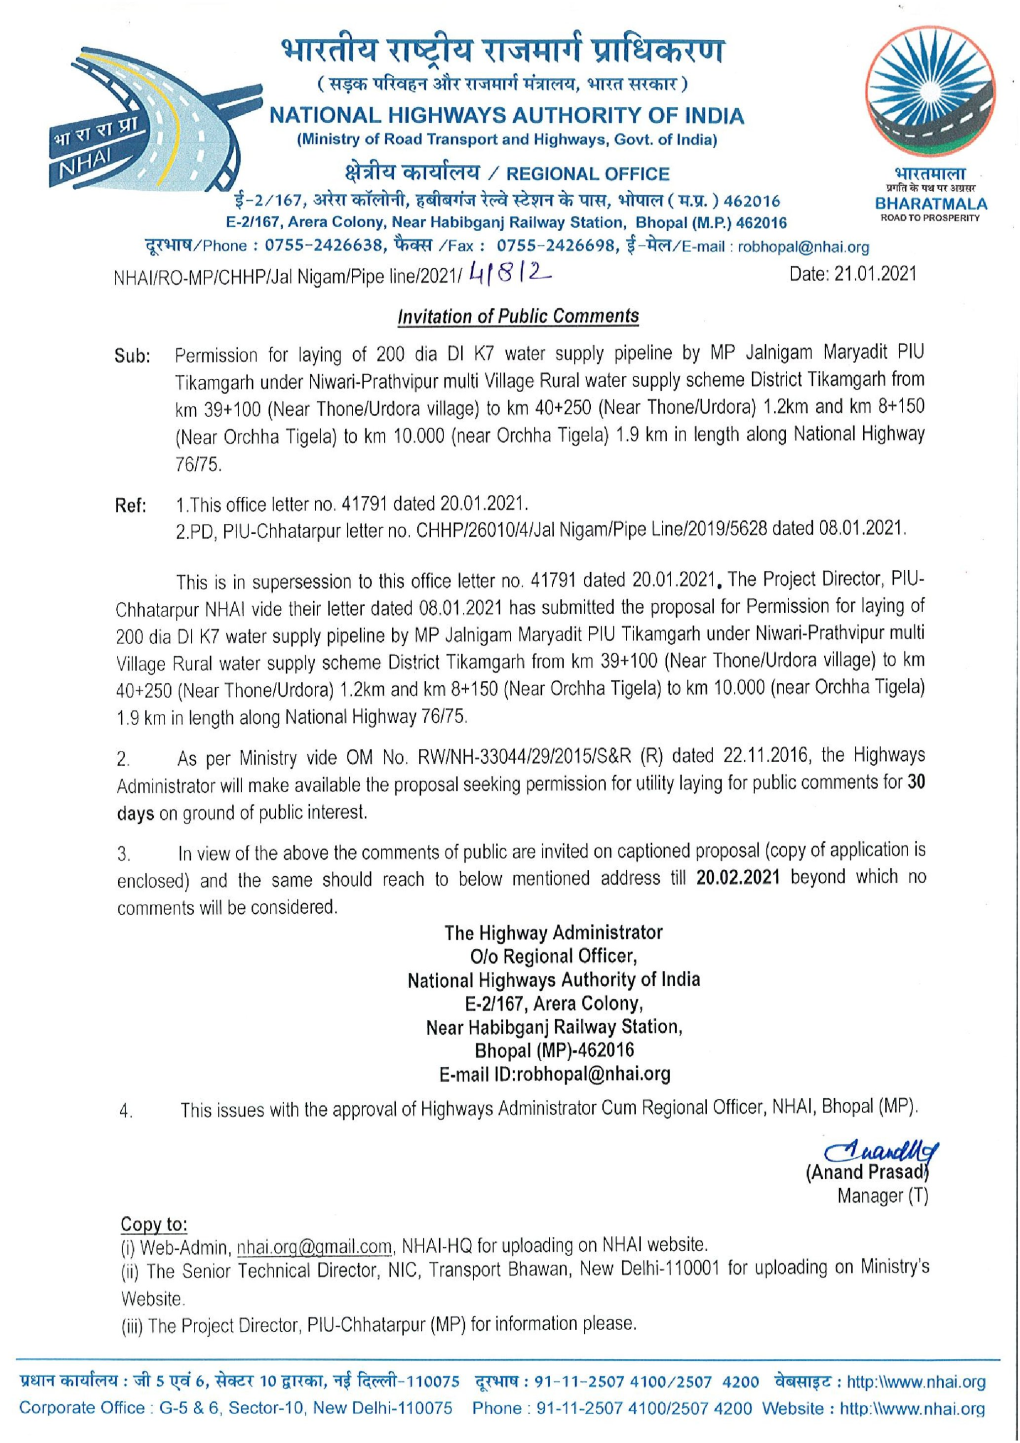 Permission for Laying of 200 Dia DI K7 Water Supply Pipeline by MP